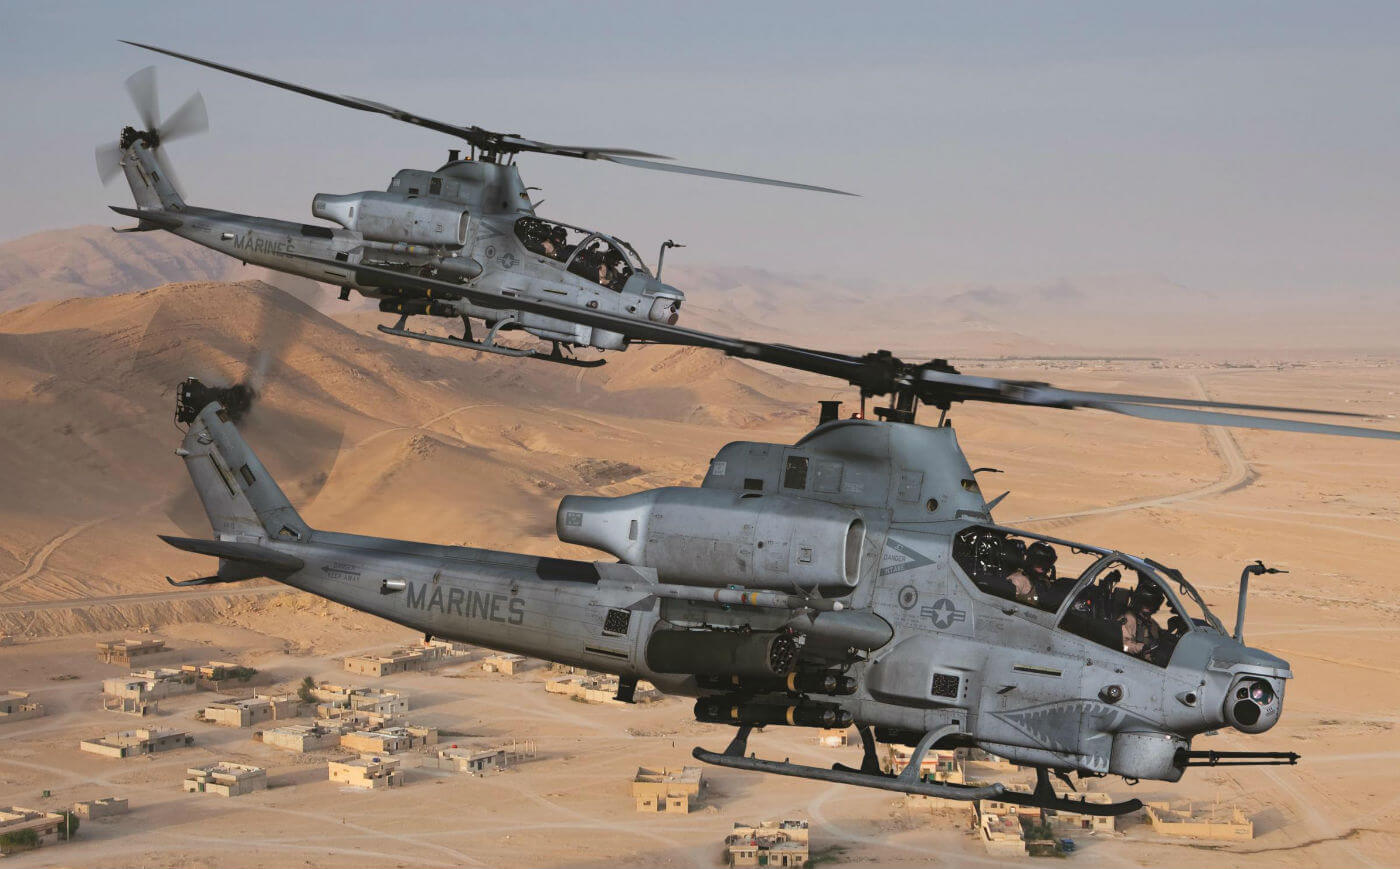 Unlike other attack helicopters, the AH-1Z Viper has integrated air-to-air strike capability in addition to superior air-to-ground anti-armor performance, which makes it the ideal platform to meet the requirements of land warfare scenarios in any of the potential hot spots around the world. Bell Photo